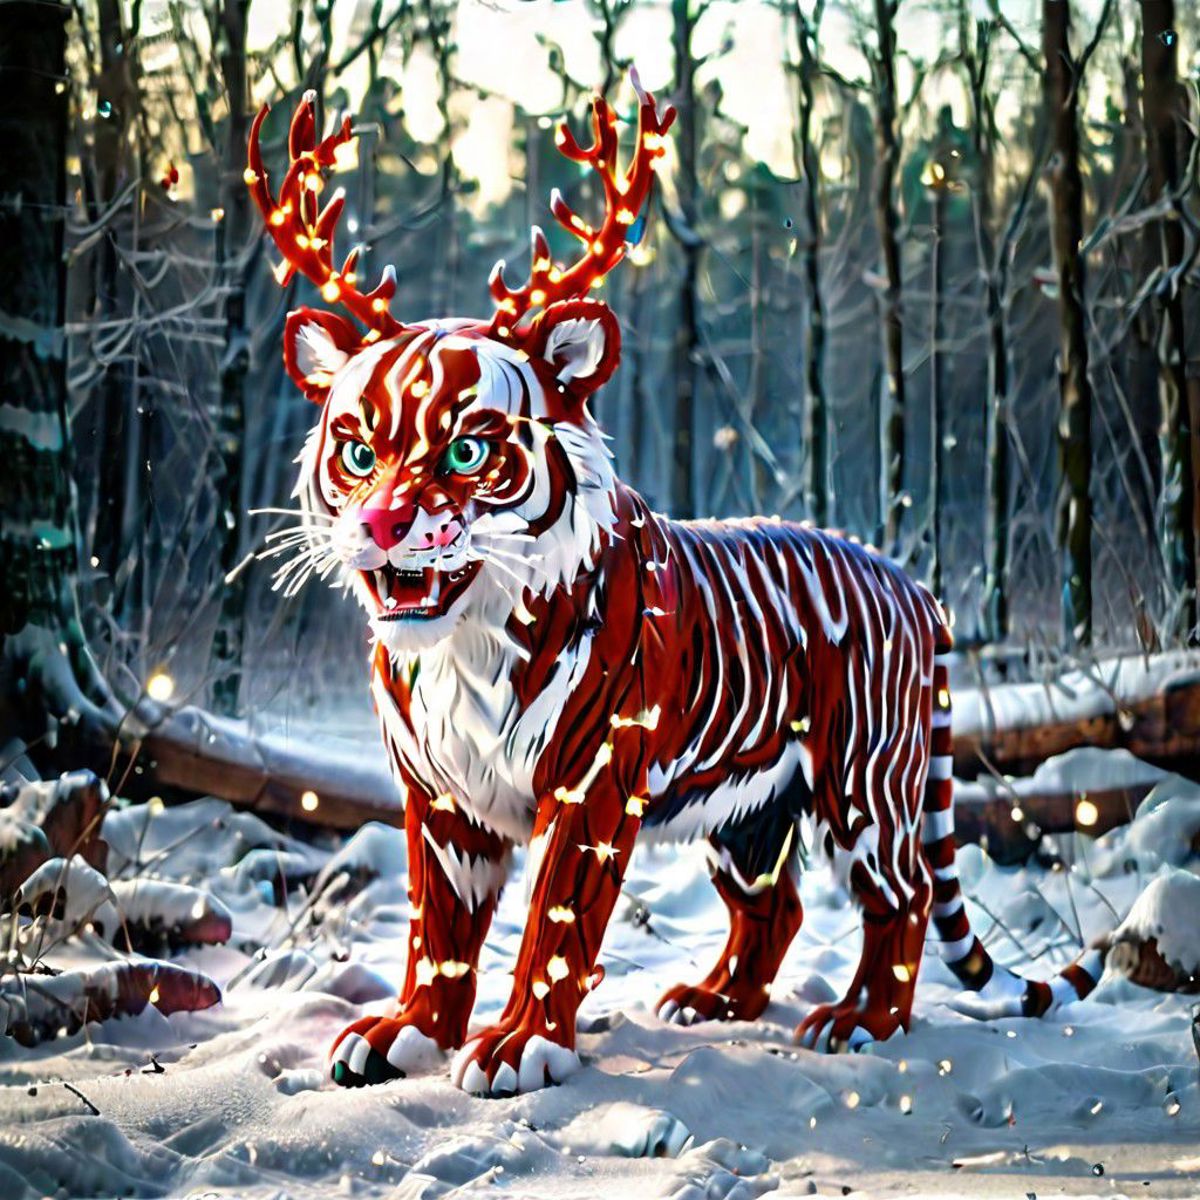 Reindeer Antlers Style XL image by nocor1i8